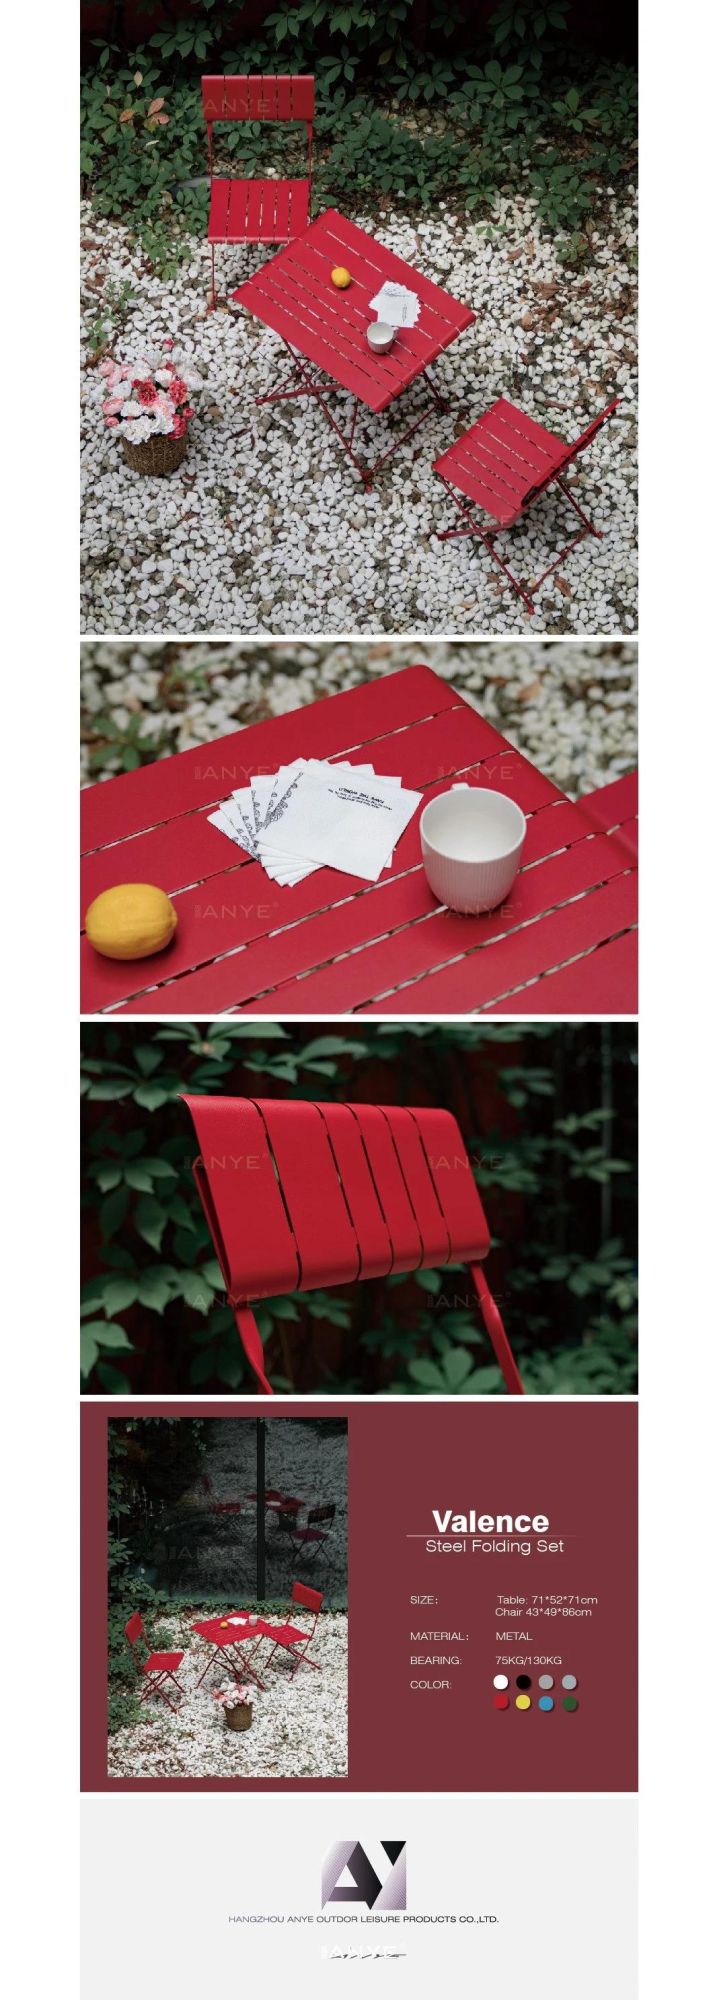 Backyard Furniture Set Rust Resistant Outdoor Foldable Modern Dining Table and Chair